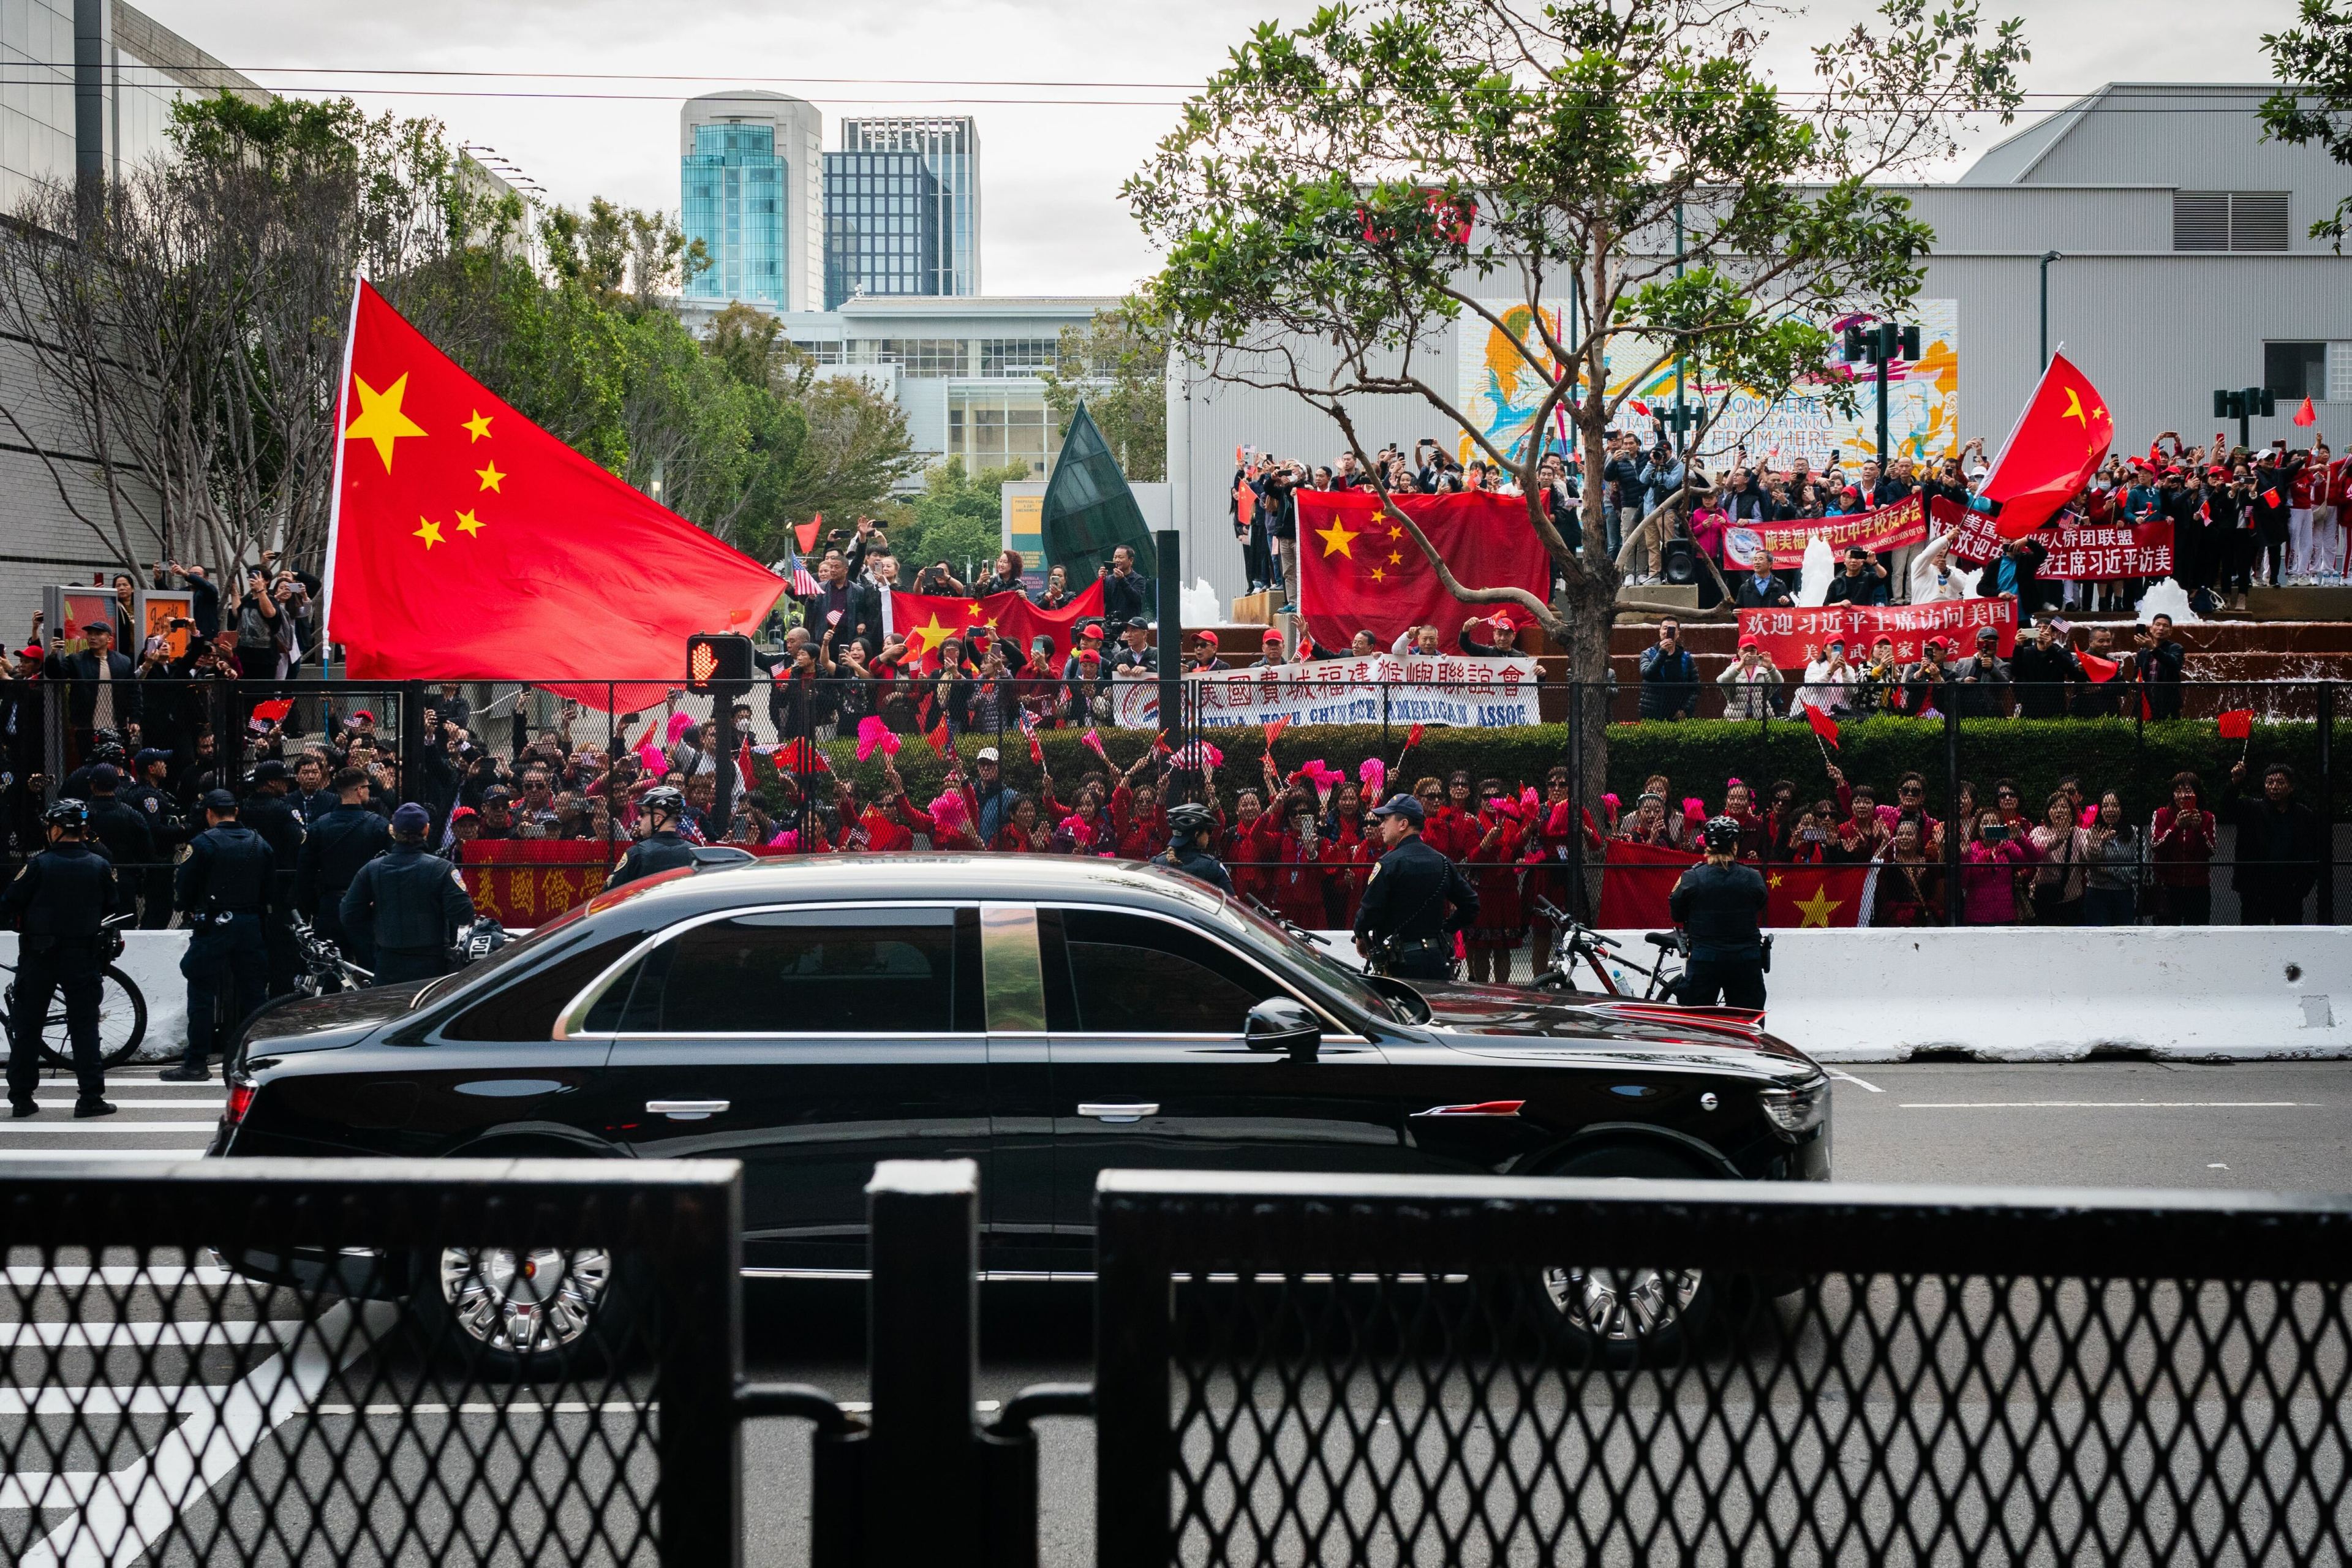 Chinese supporters wave flags behind a metal barricade on a city street as a black sedan passes by.